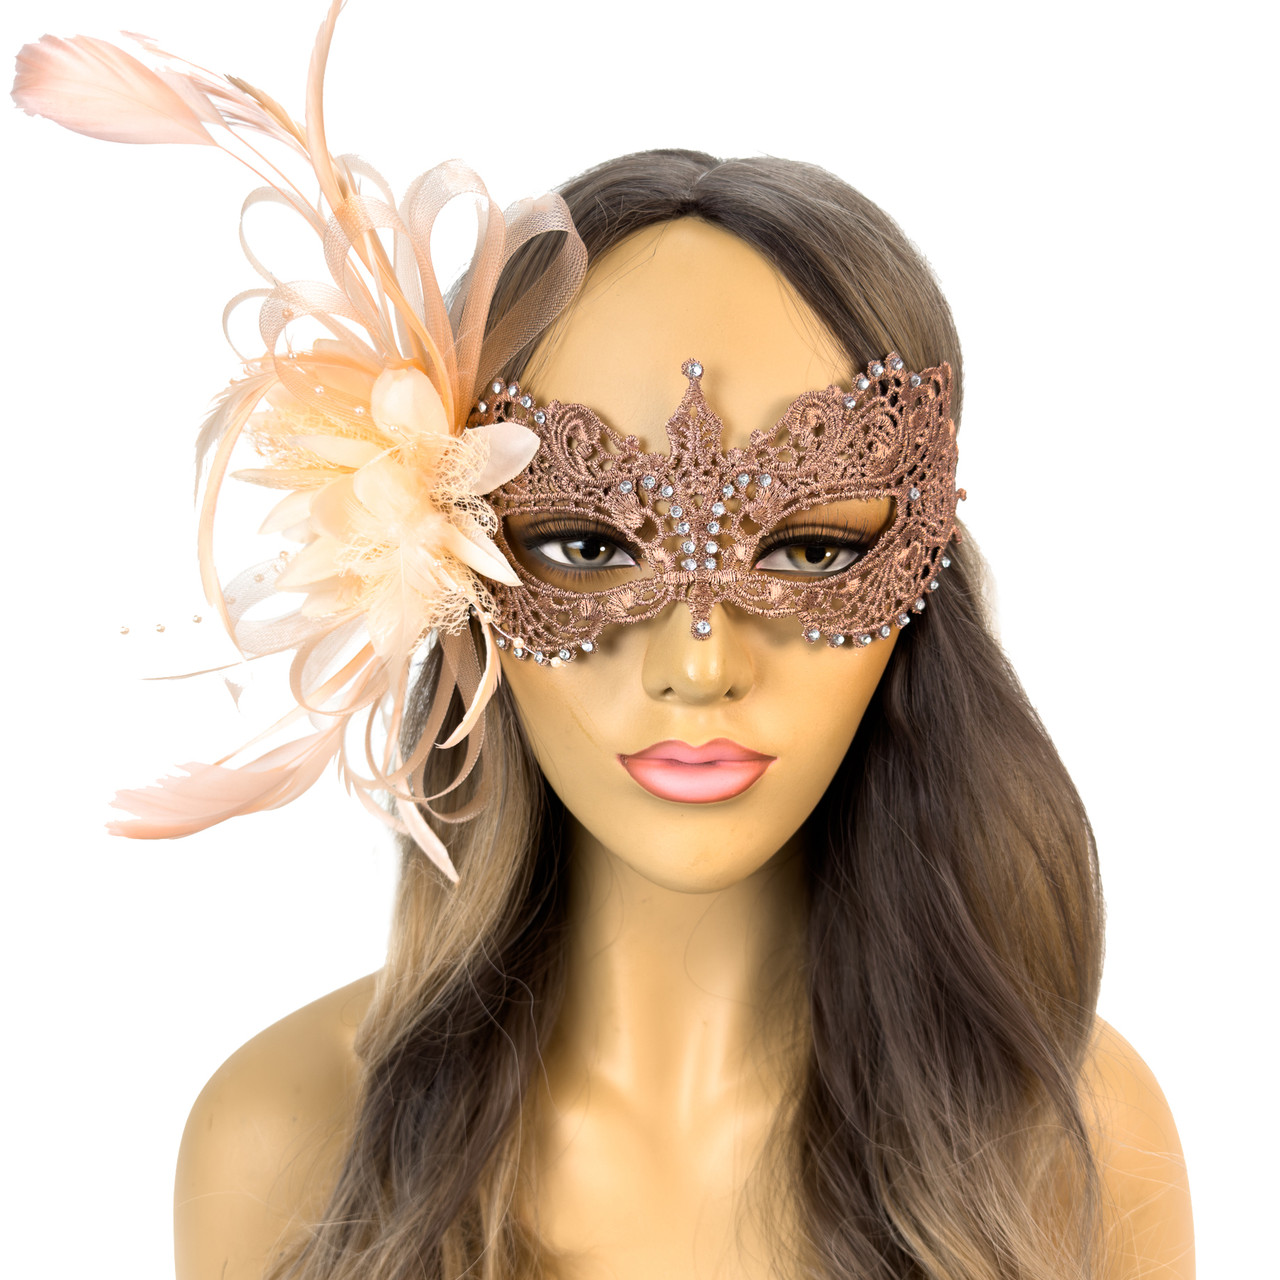 Lace Masquerade Mask with Luxury Feathers Rose Gold by Beyond Masquerade